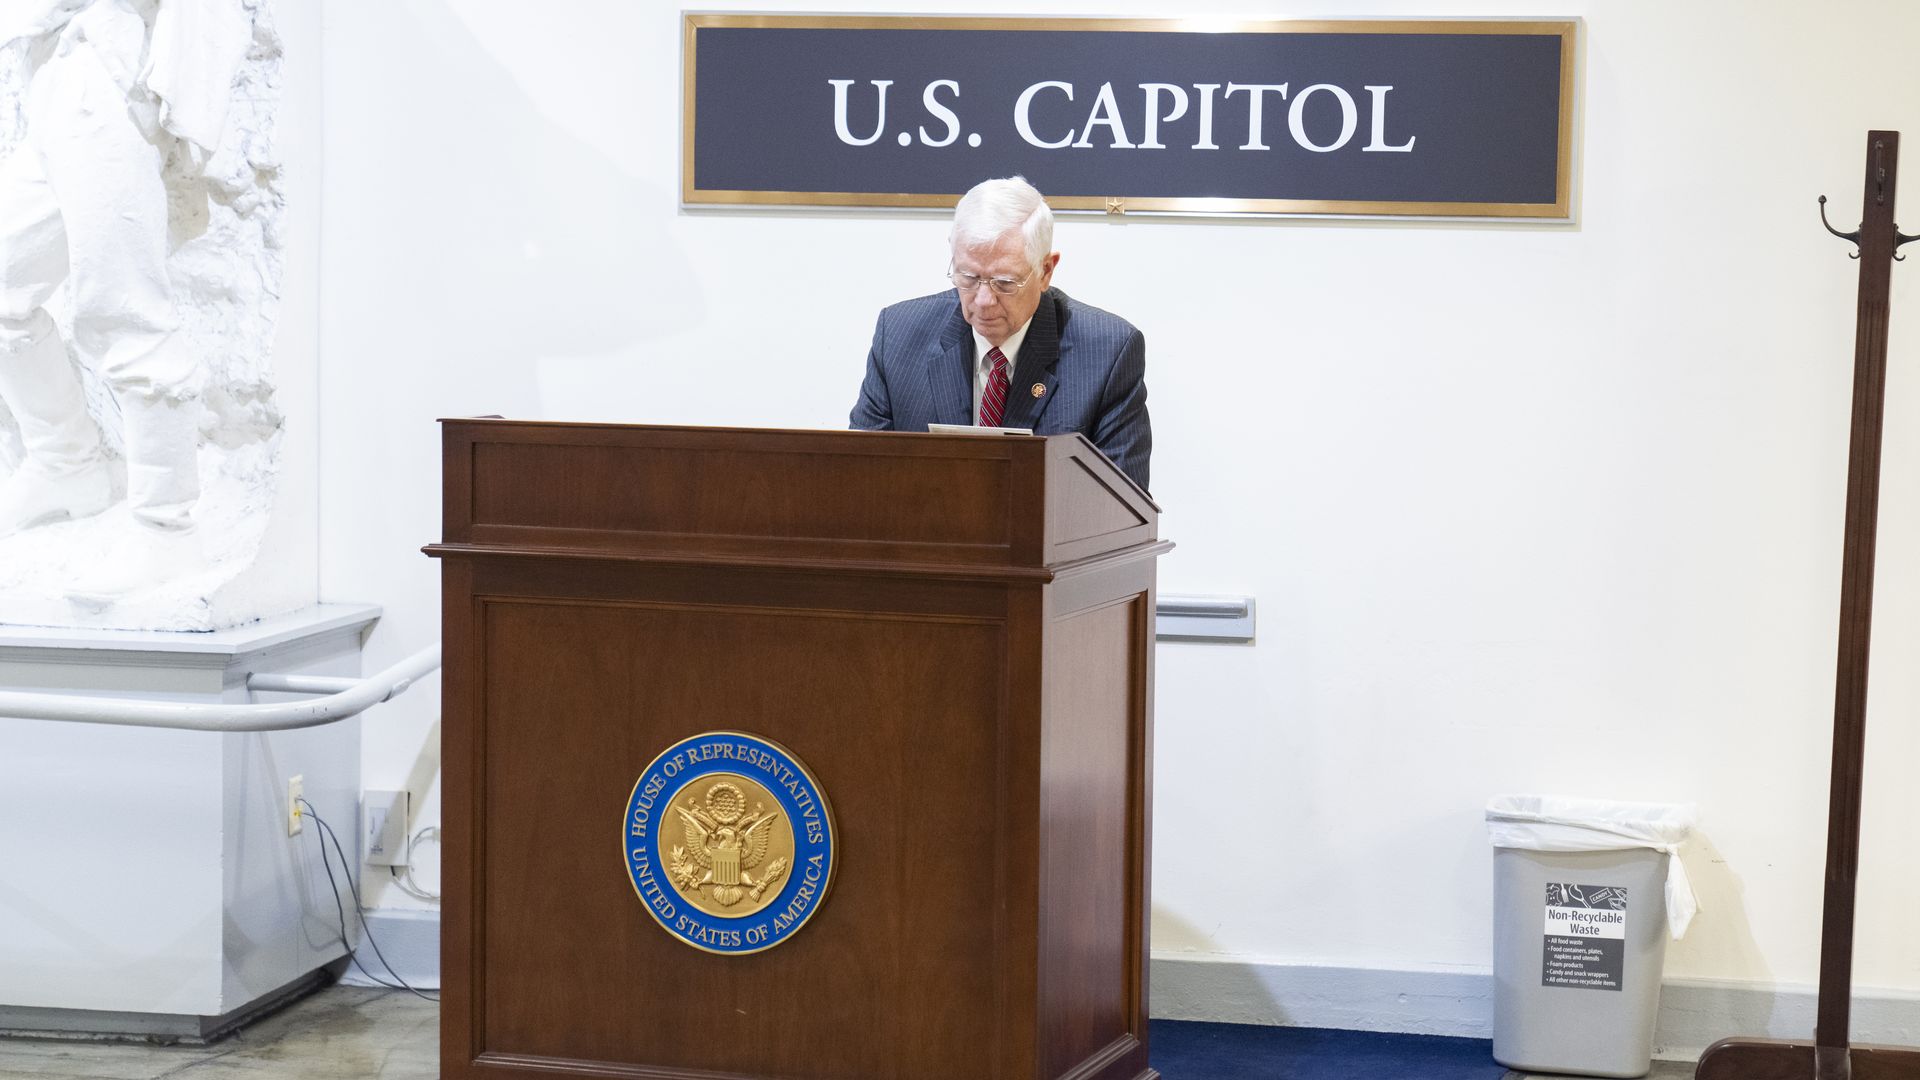 Rep. Mo Brooks, R-Ala., works at a podium in the U.S. Capitols Rayburn subway on Wednesday, March 2, 2022.